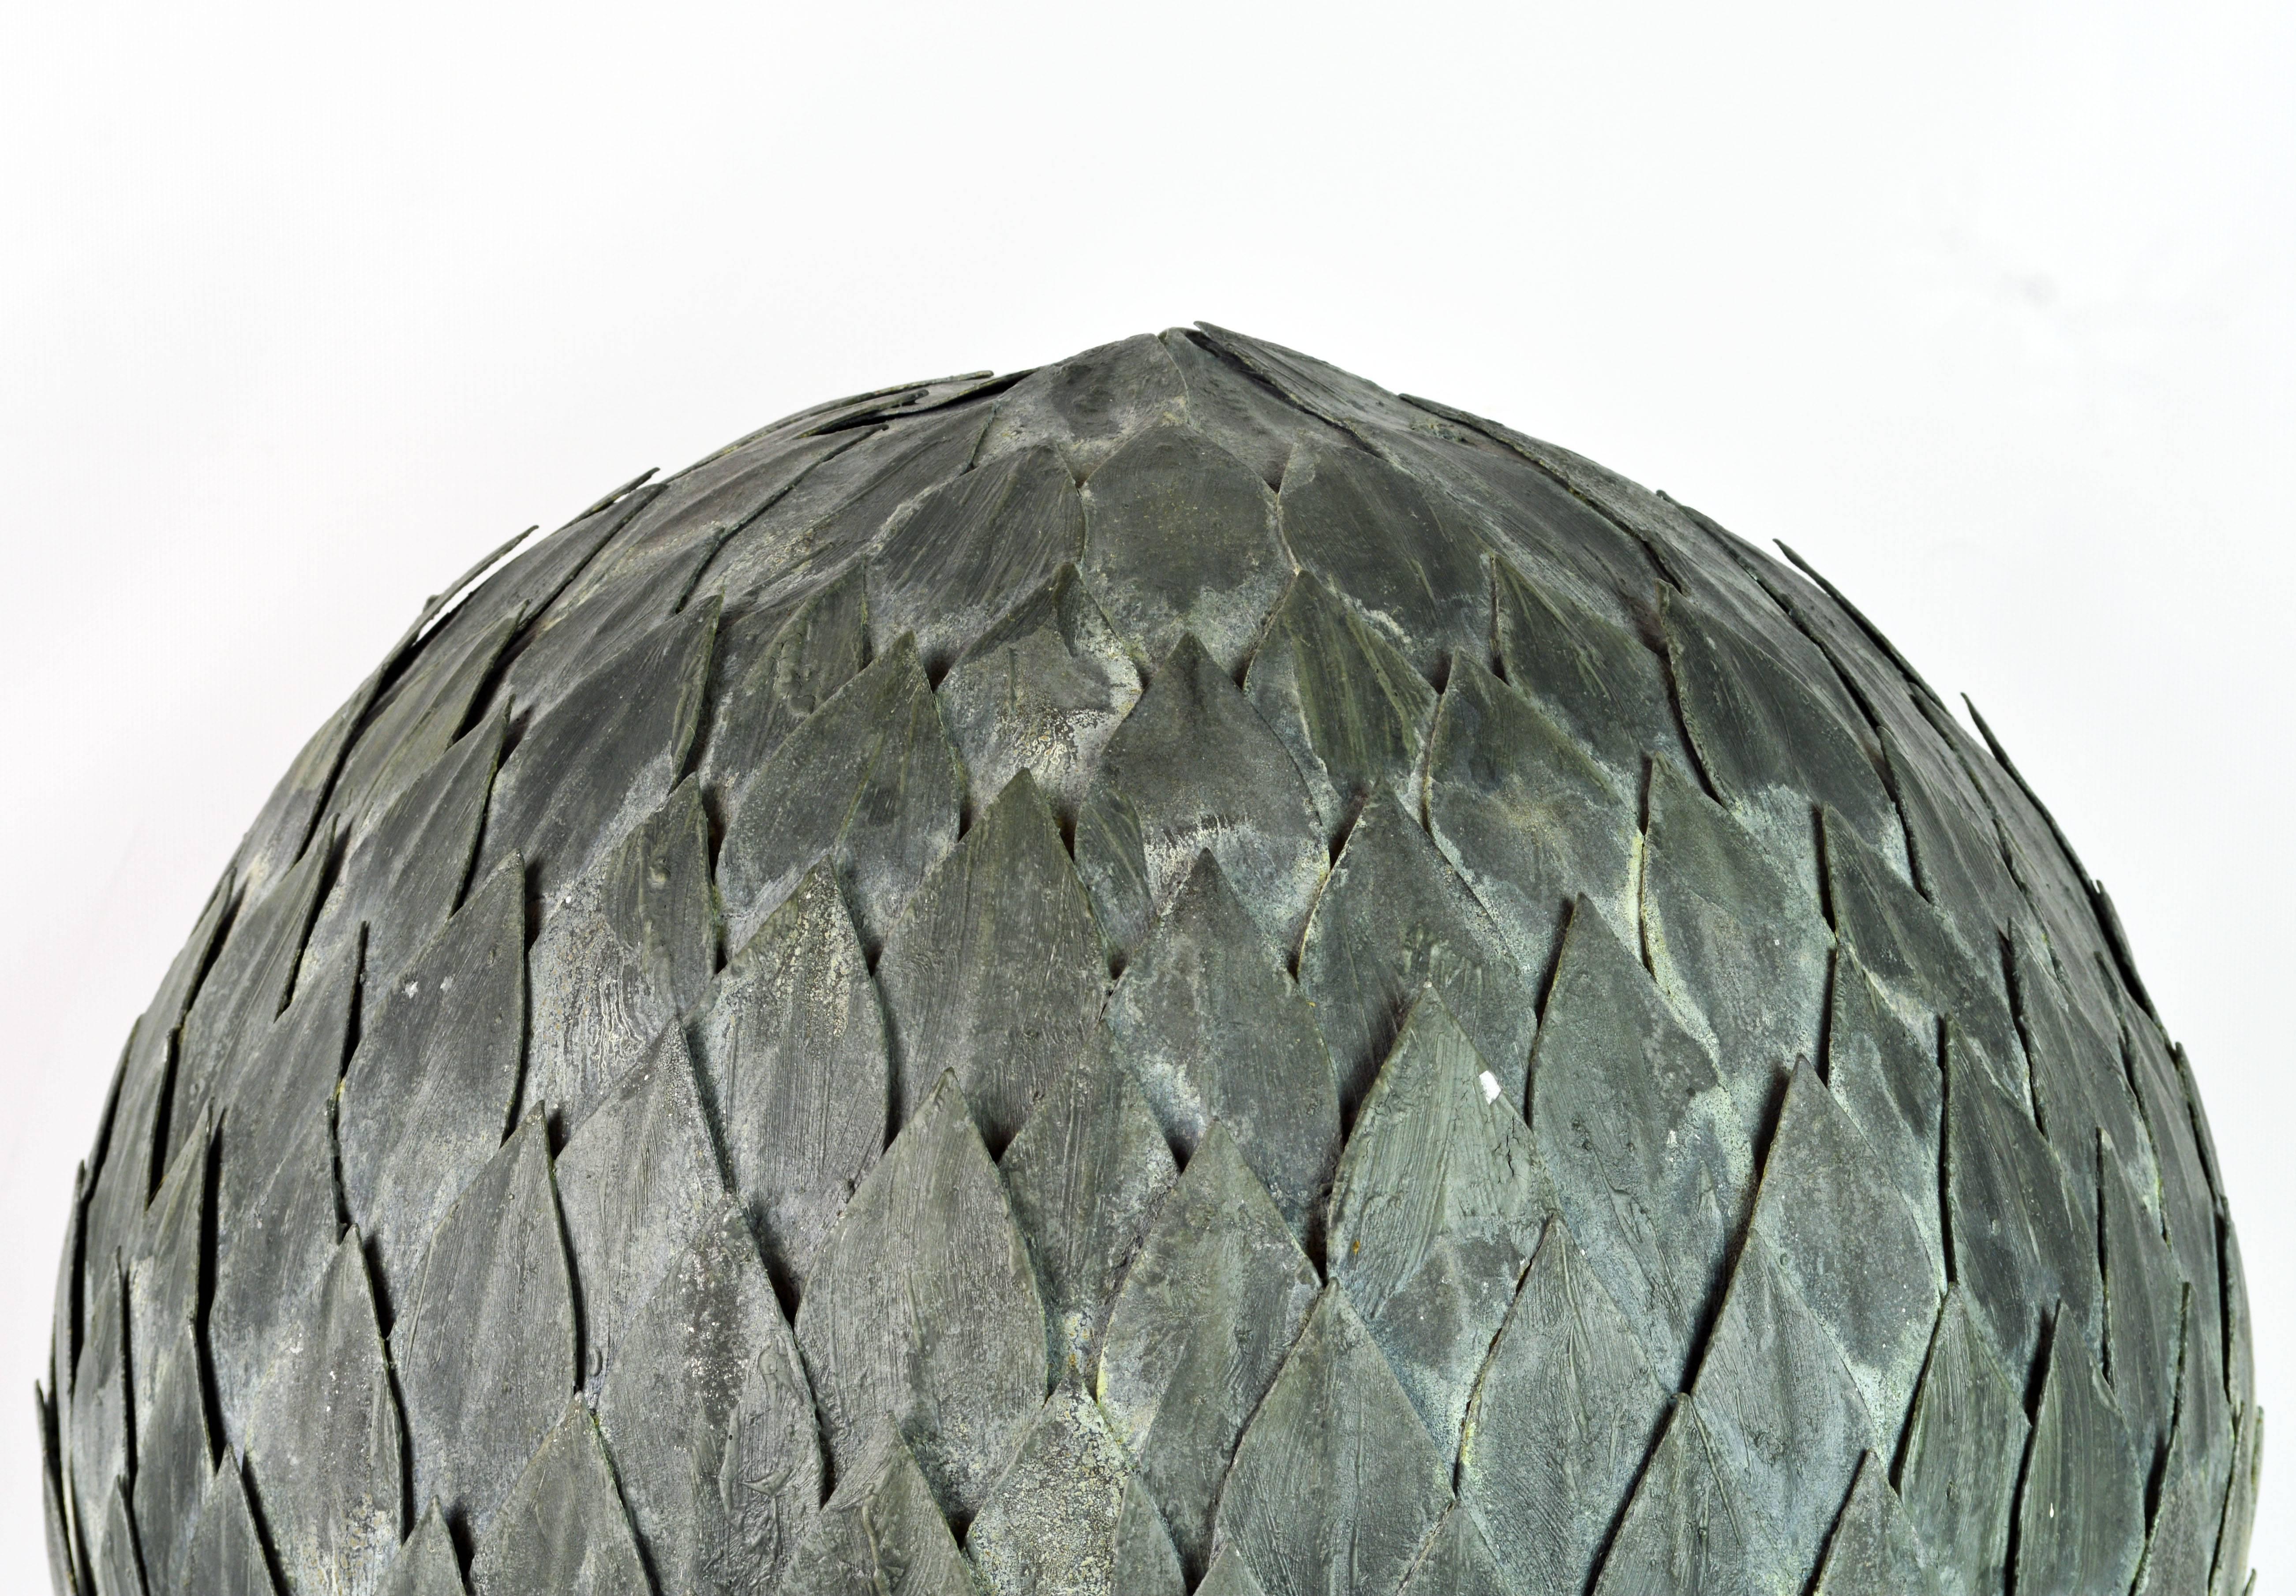 Organic Modern Decorative Welded and Patinated Metal Laurel Leaf Ball or Fountain Head